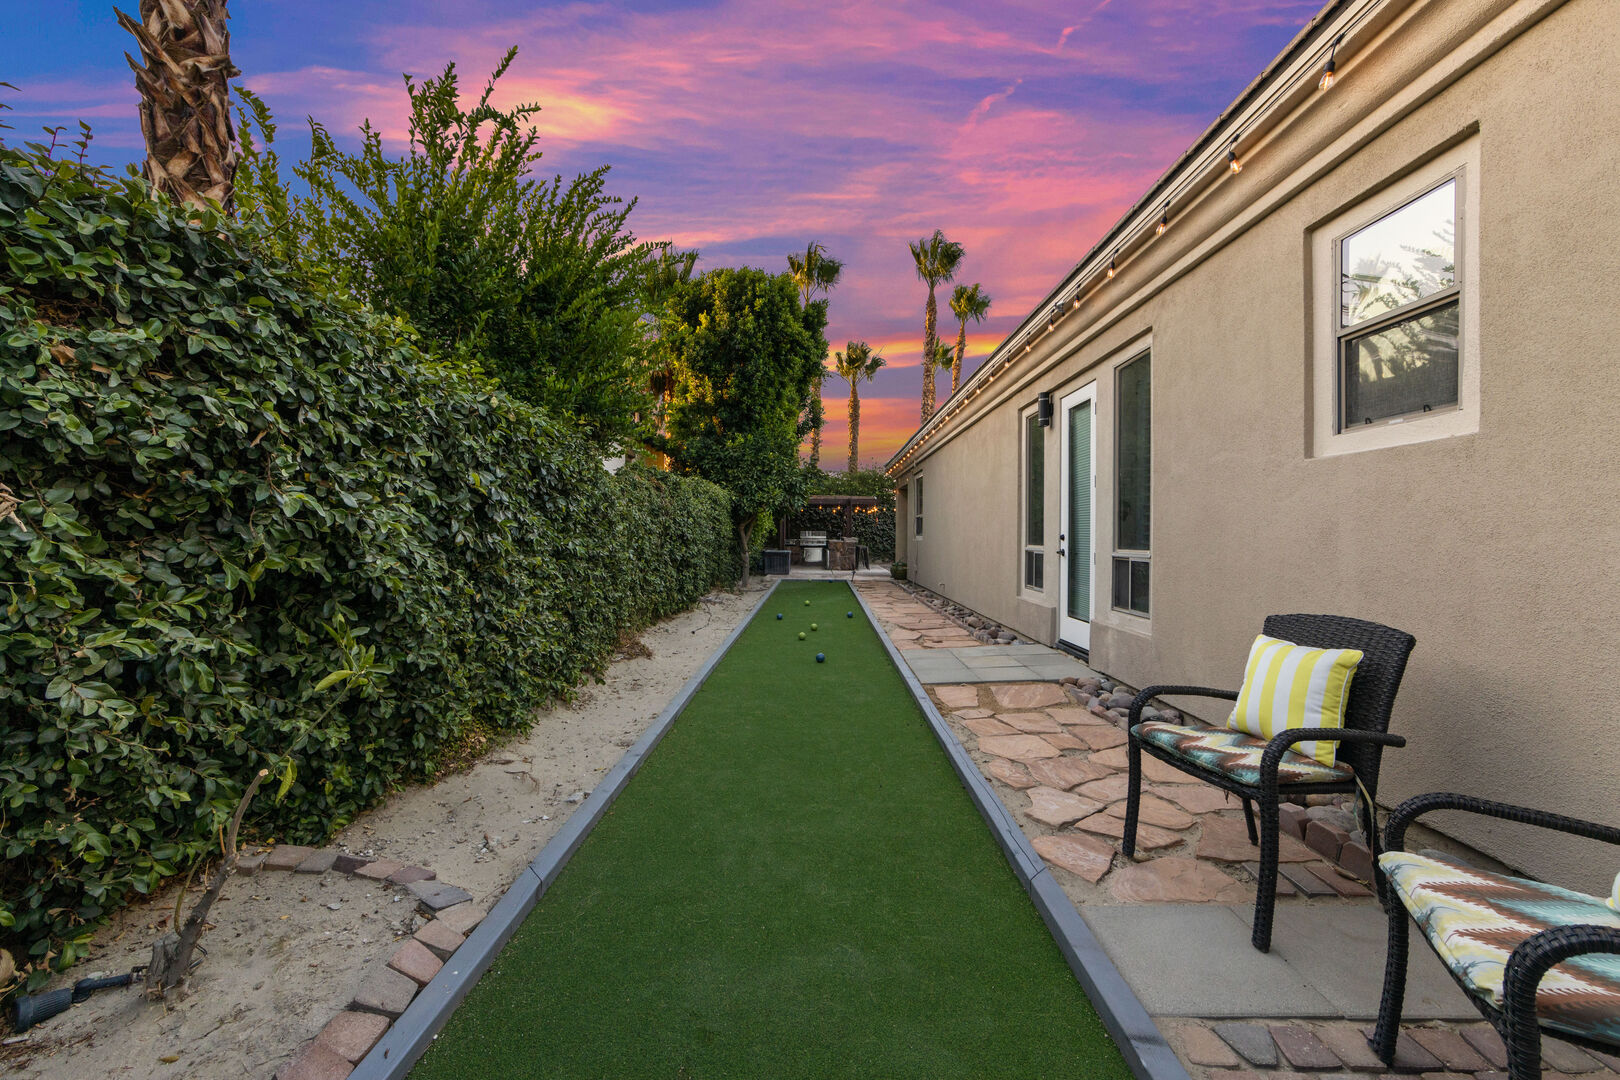 The left side of the home features a bocce ball area for you to practice your skills.